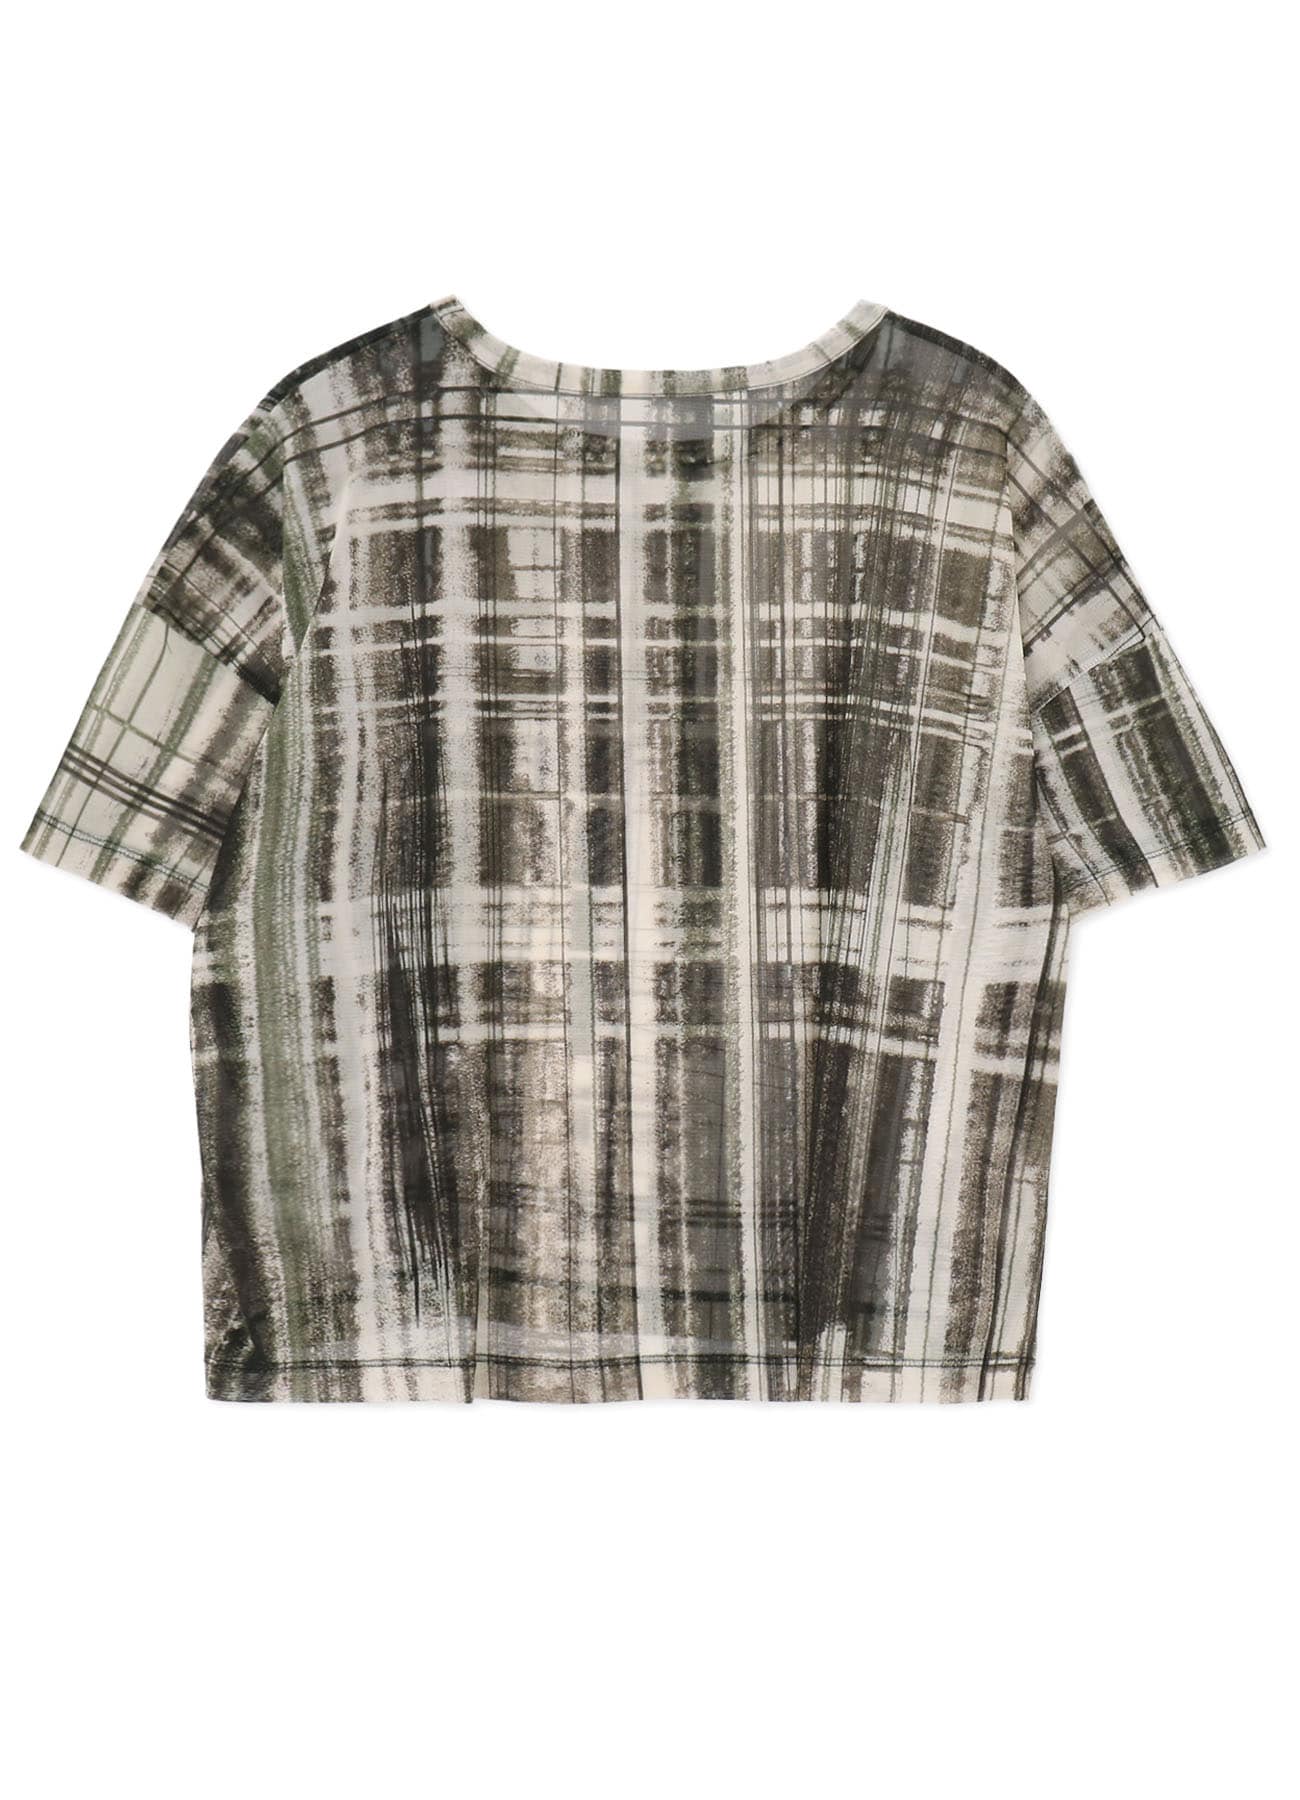 HAND PAINTED PLAID PRINT OVERSIZED T